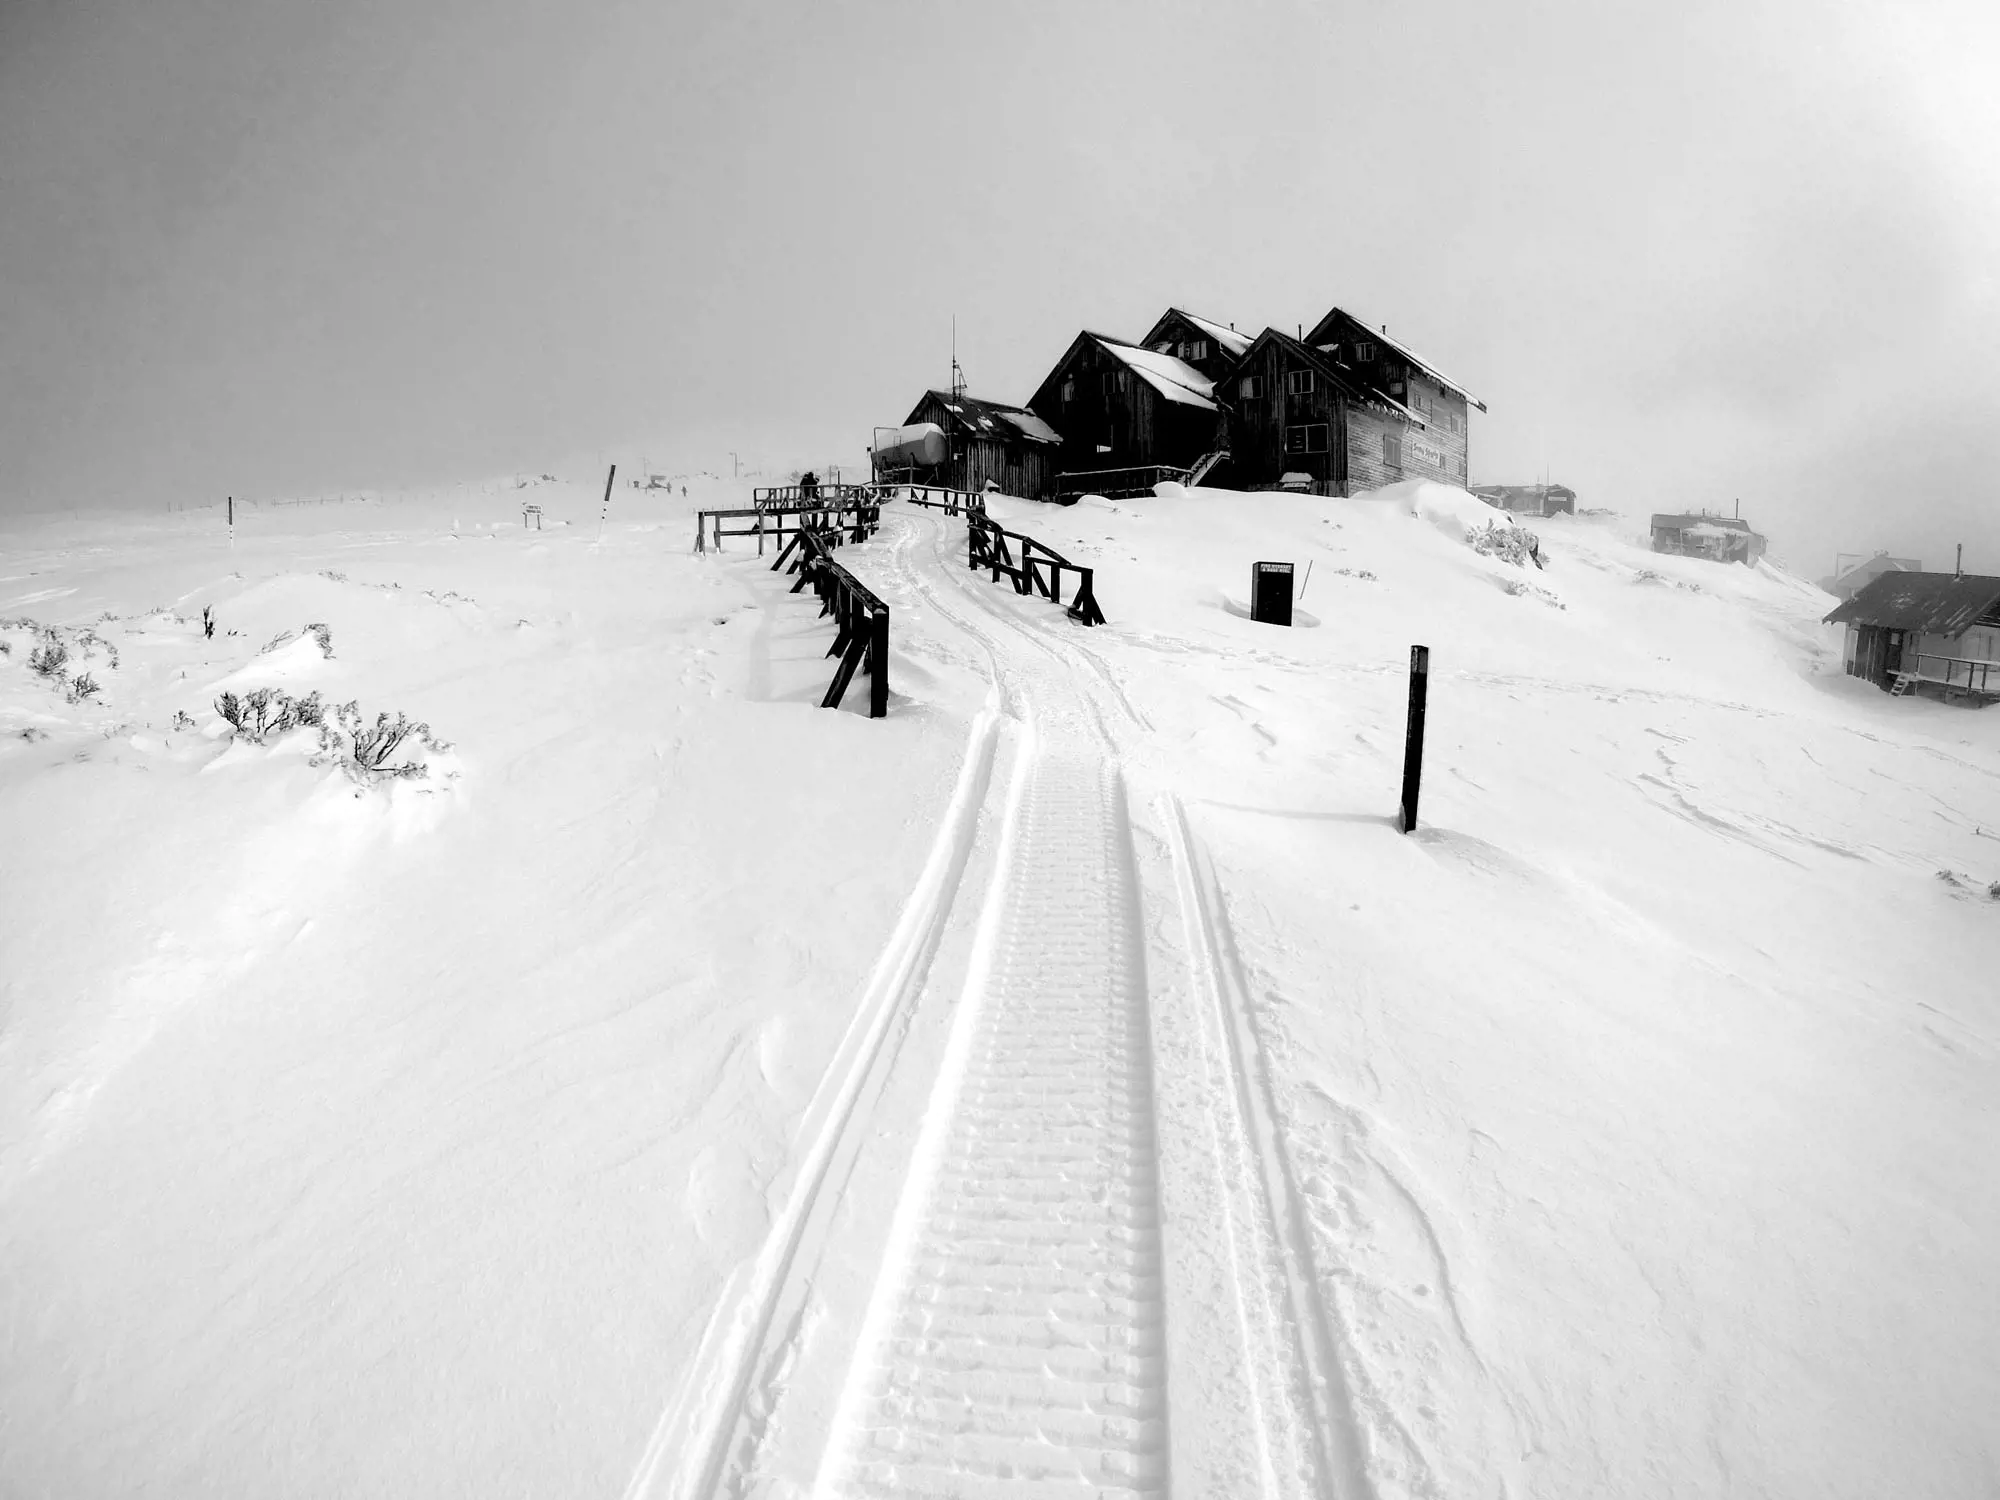 A wooden ski lodge stands at the top of a gentle snow-covered slope at Ben Lomond.